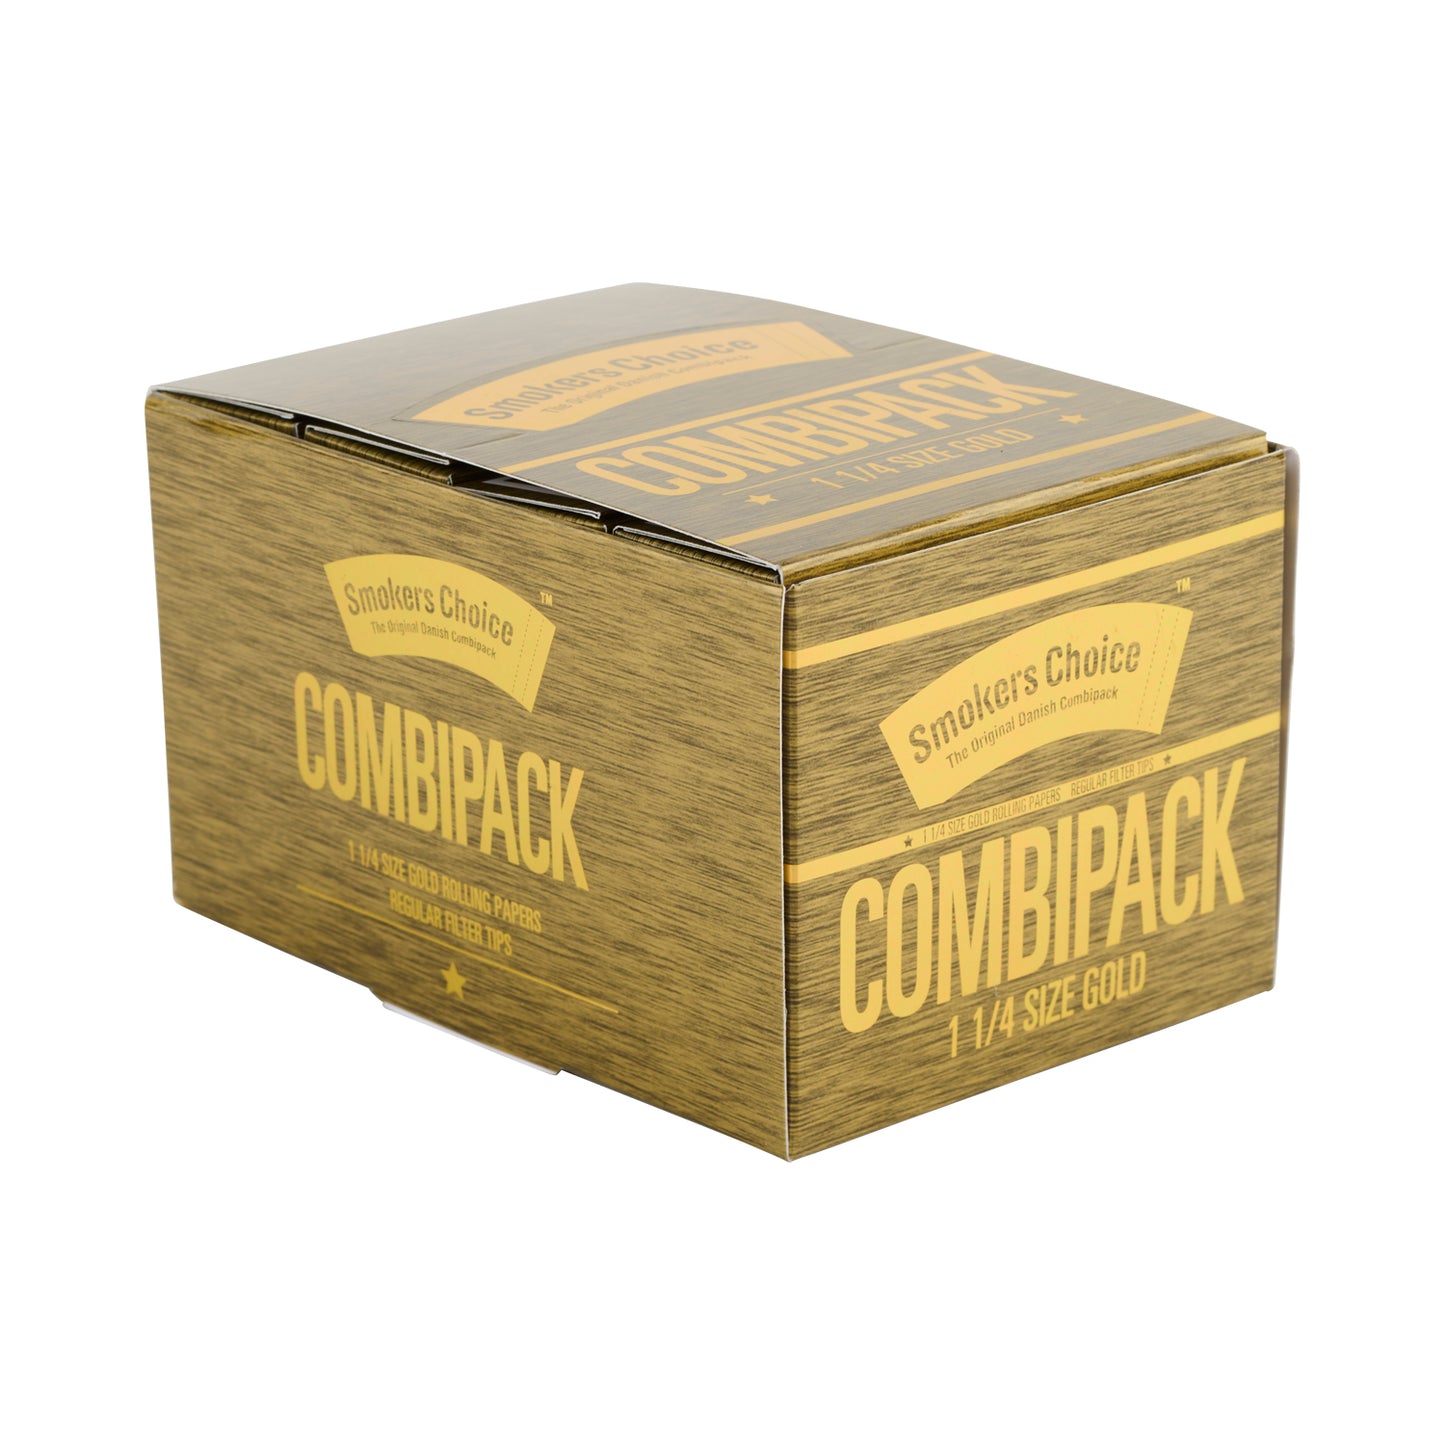 CombiPack Gold 1,25 size